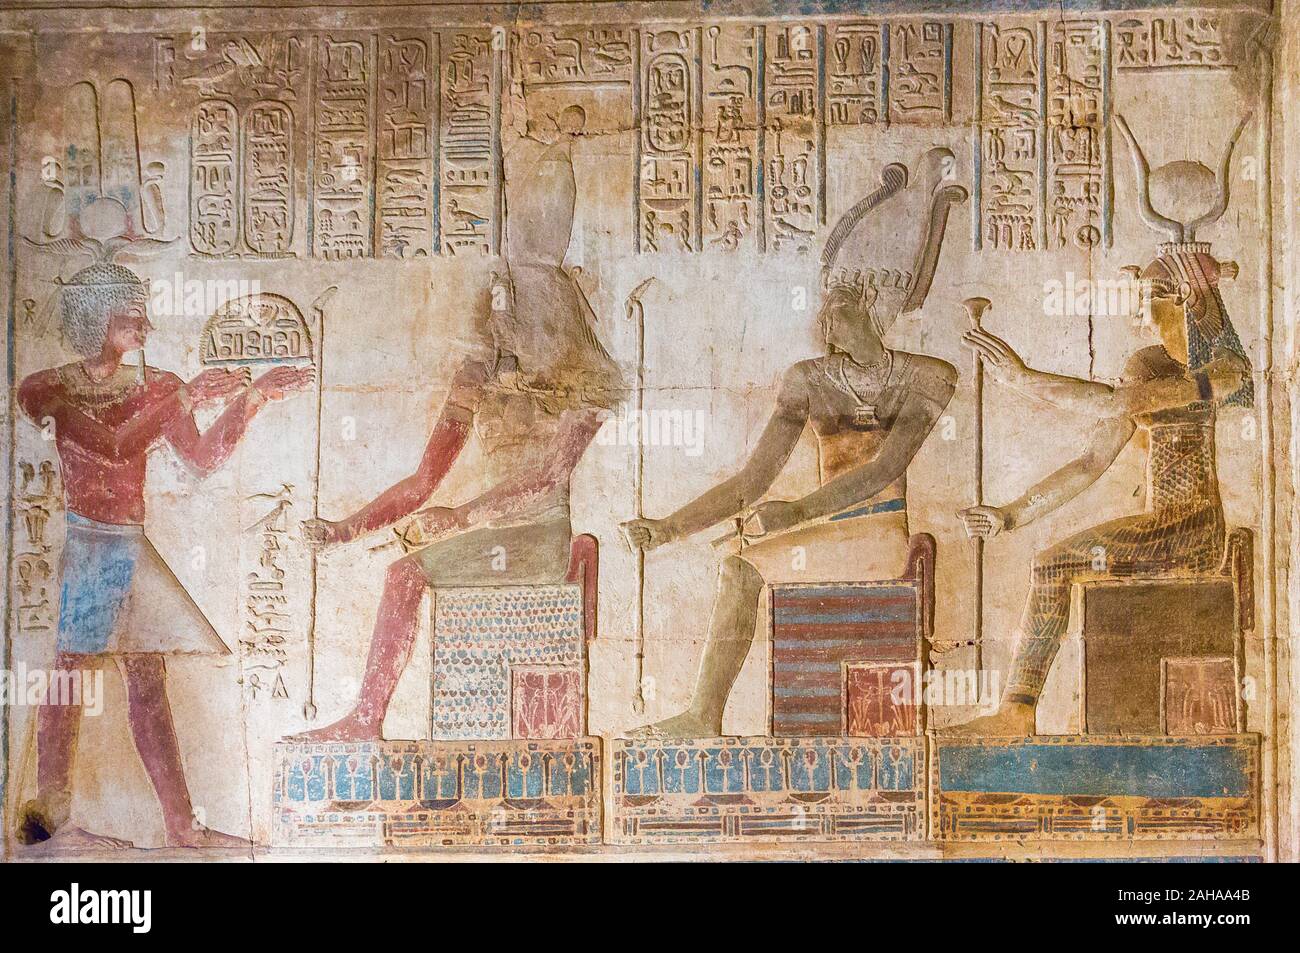 UNESCO World Heritage, Thebes in Egypt, Karnak site, ptolemaic temple of Opet. The king offers food to gods Geb, Osiris-Ounnefer and goddess Nut. Stock Photo